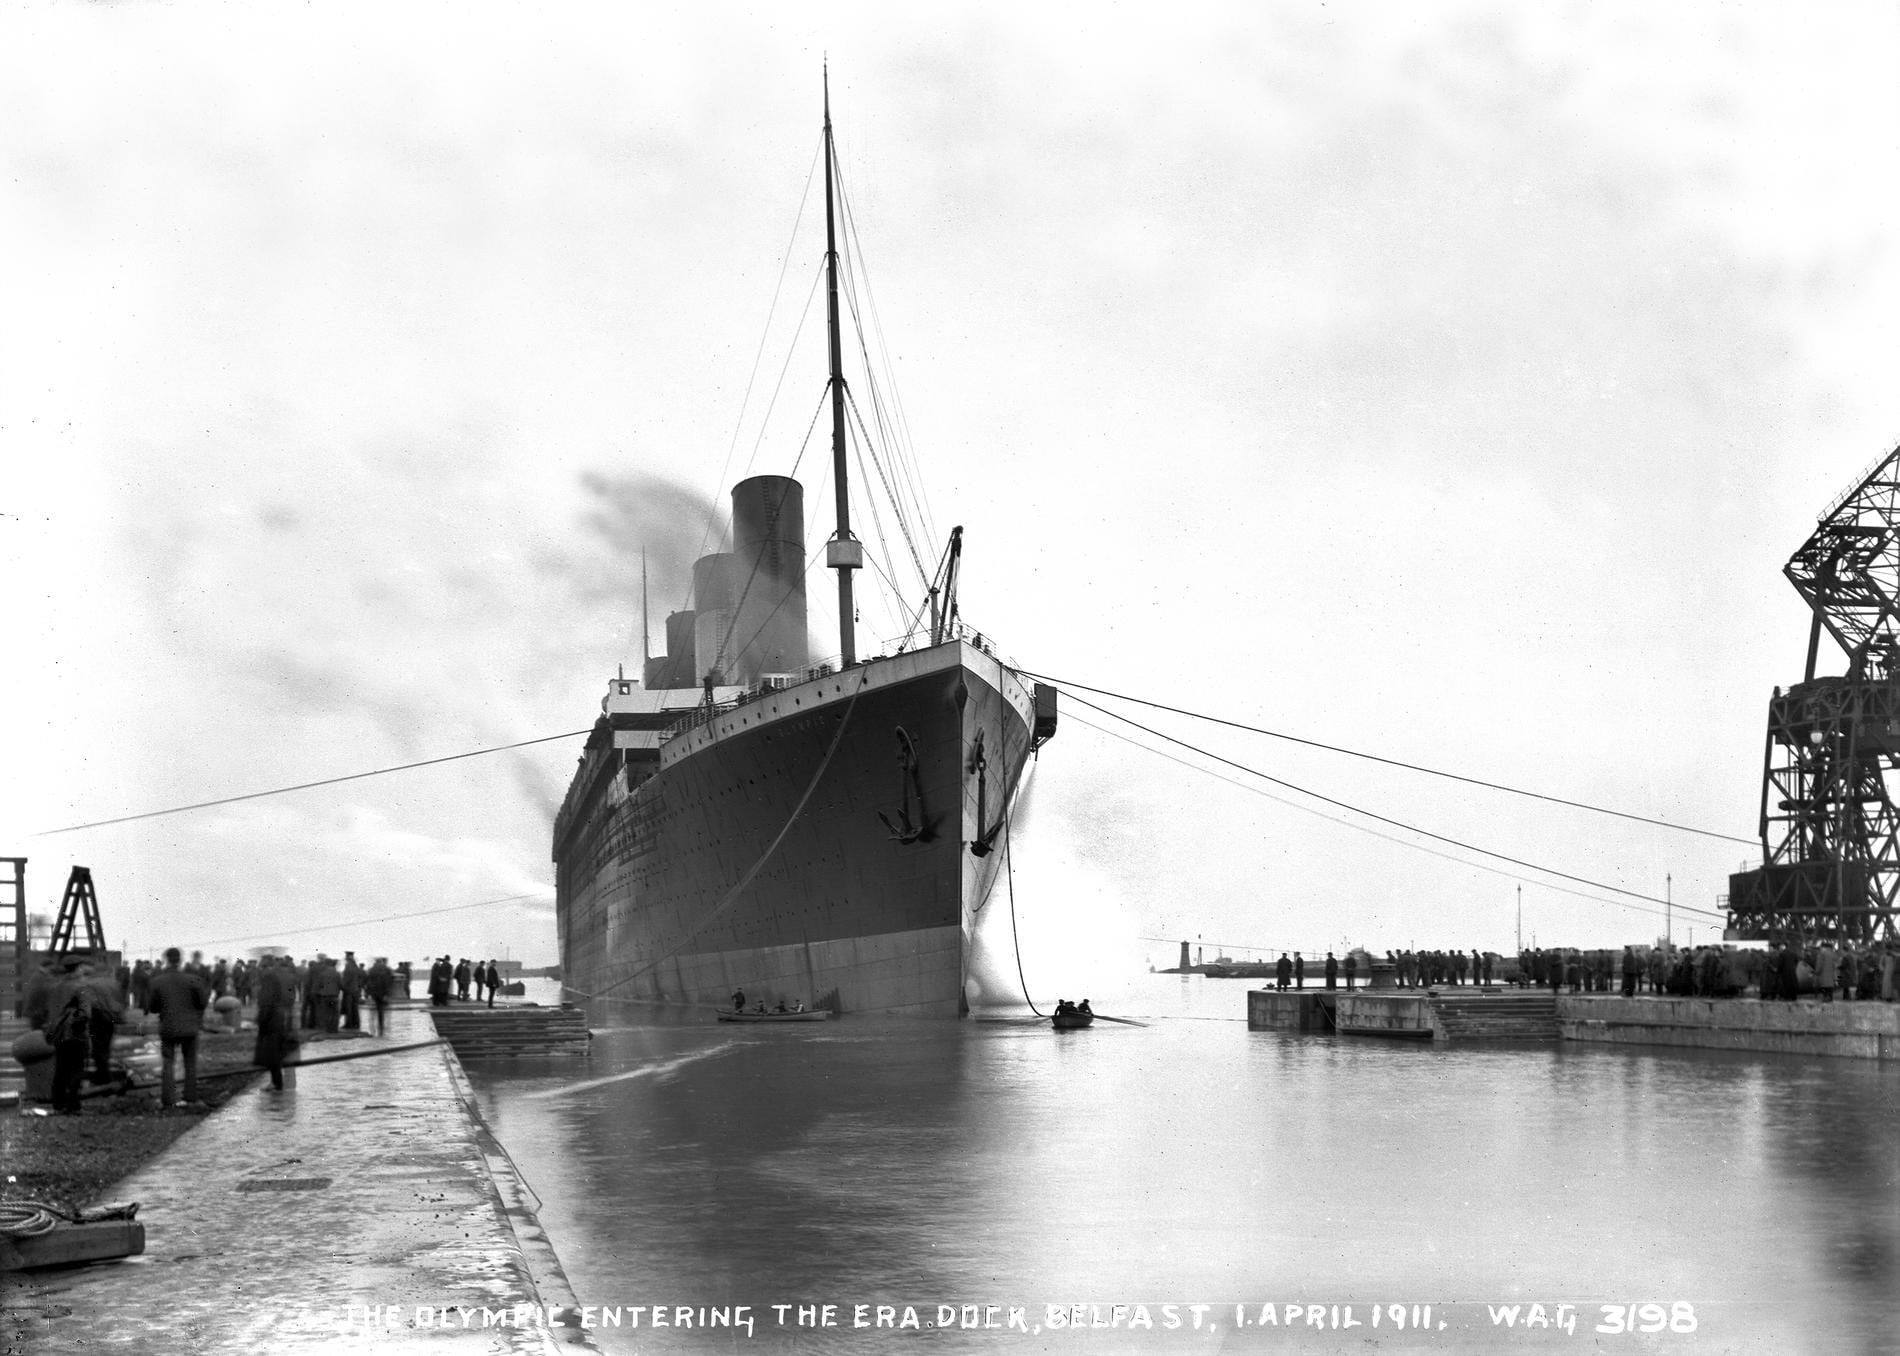 RMS Olympic Official​™ (@RMSOlympicOff) / X